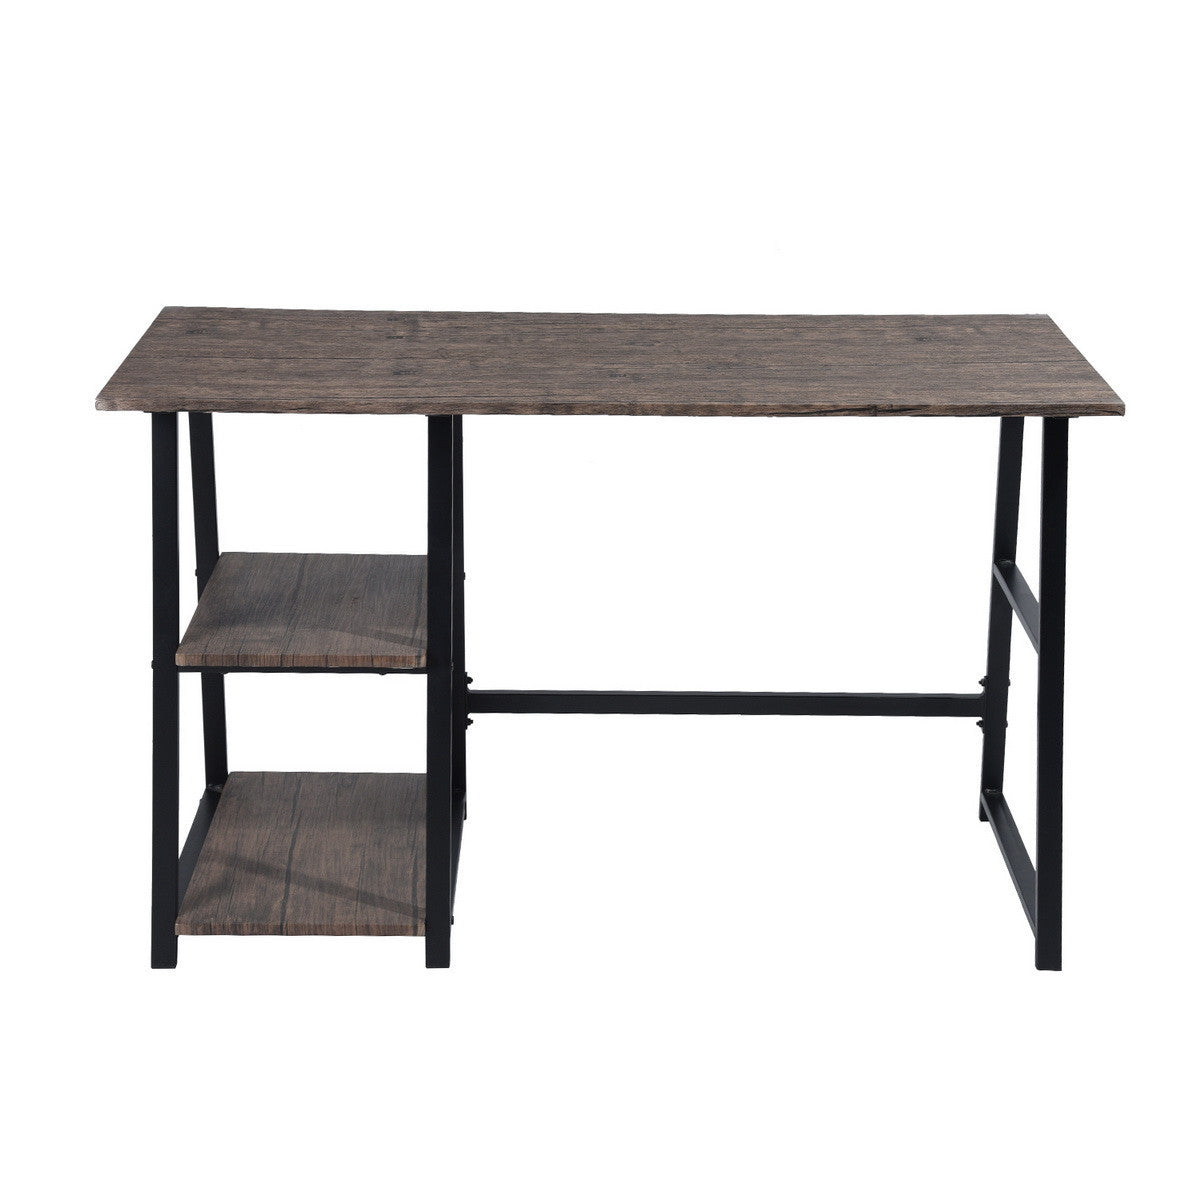 Modern Home Office Computer Table With Storage Shelves - Vintage Brown-4